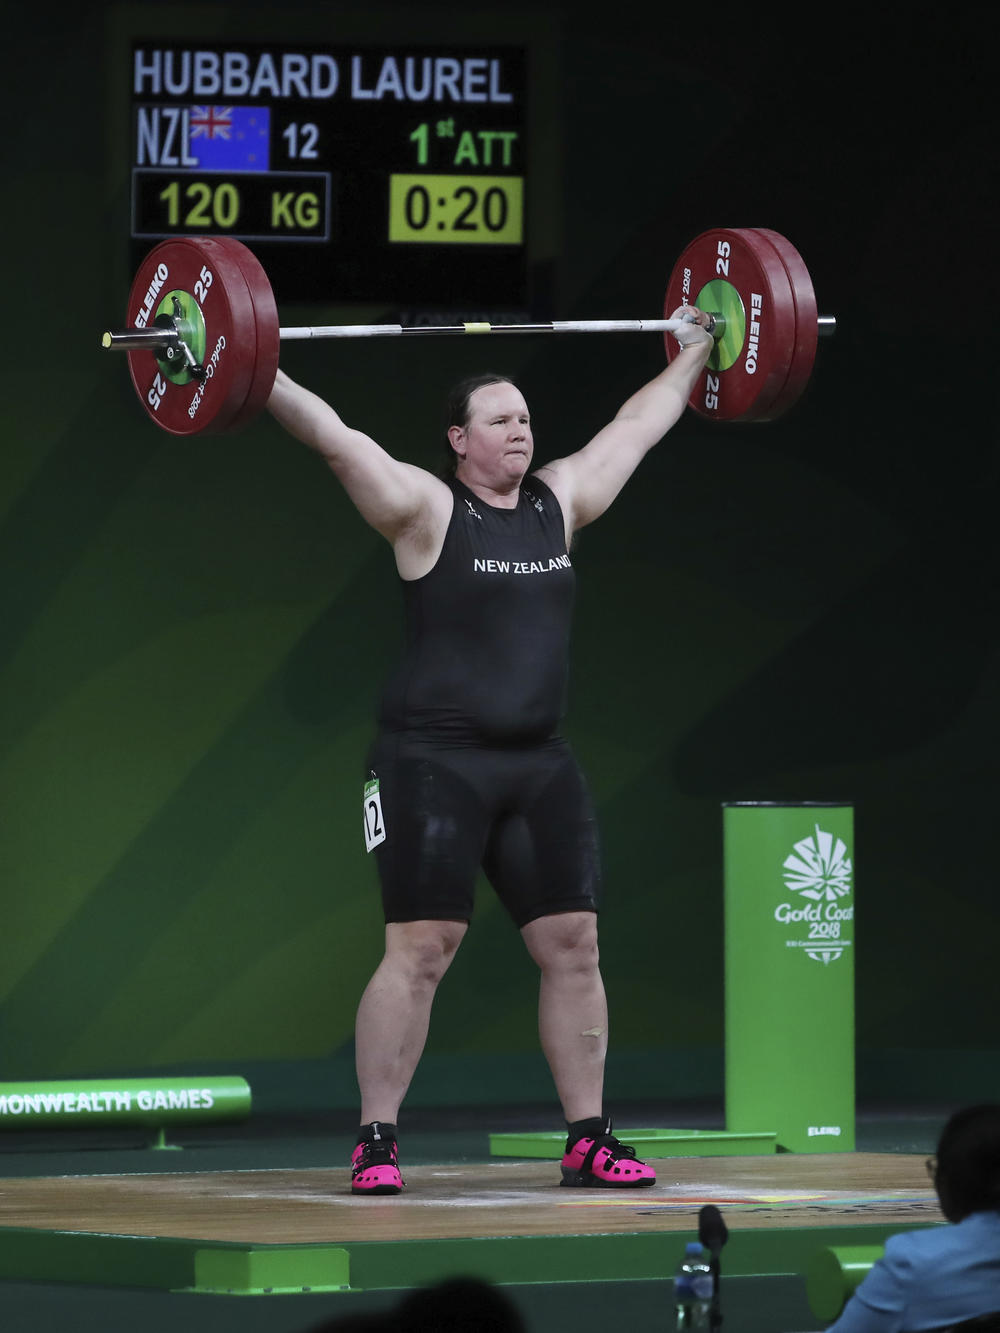 Hubbard competes at the 2018 Commonwealth Games.